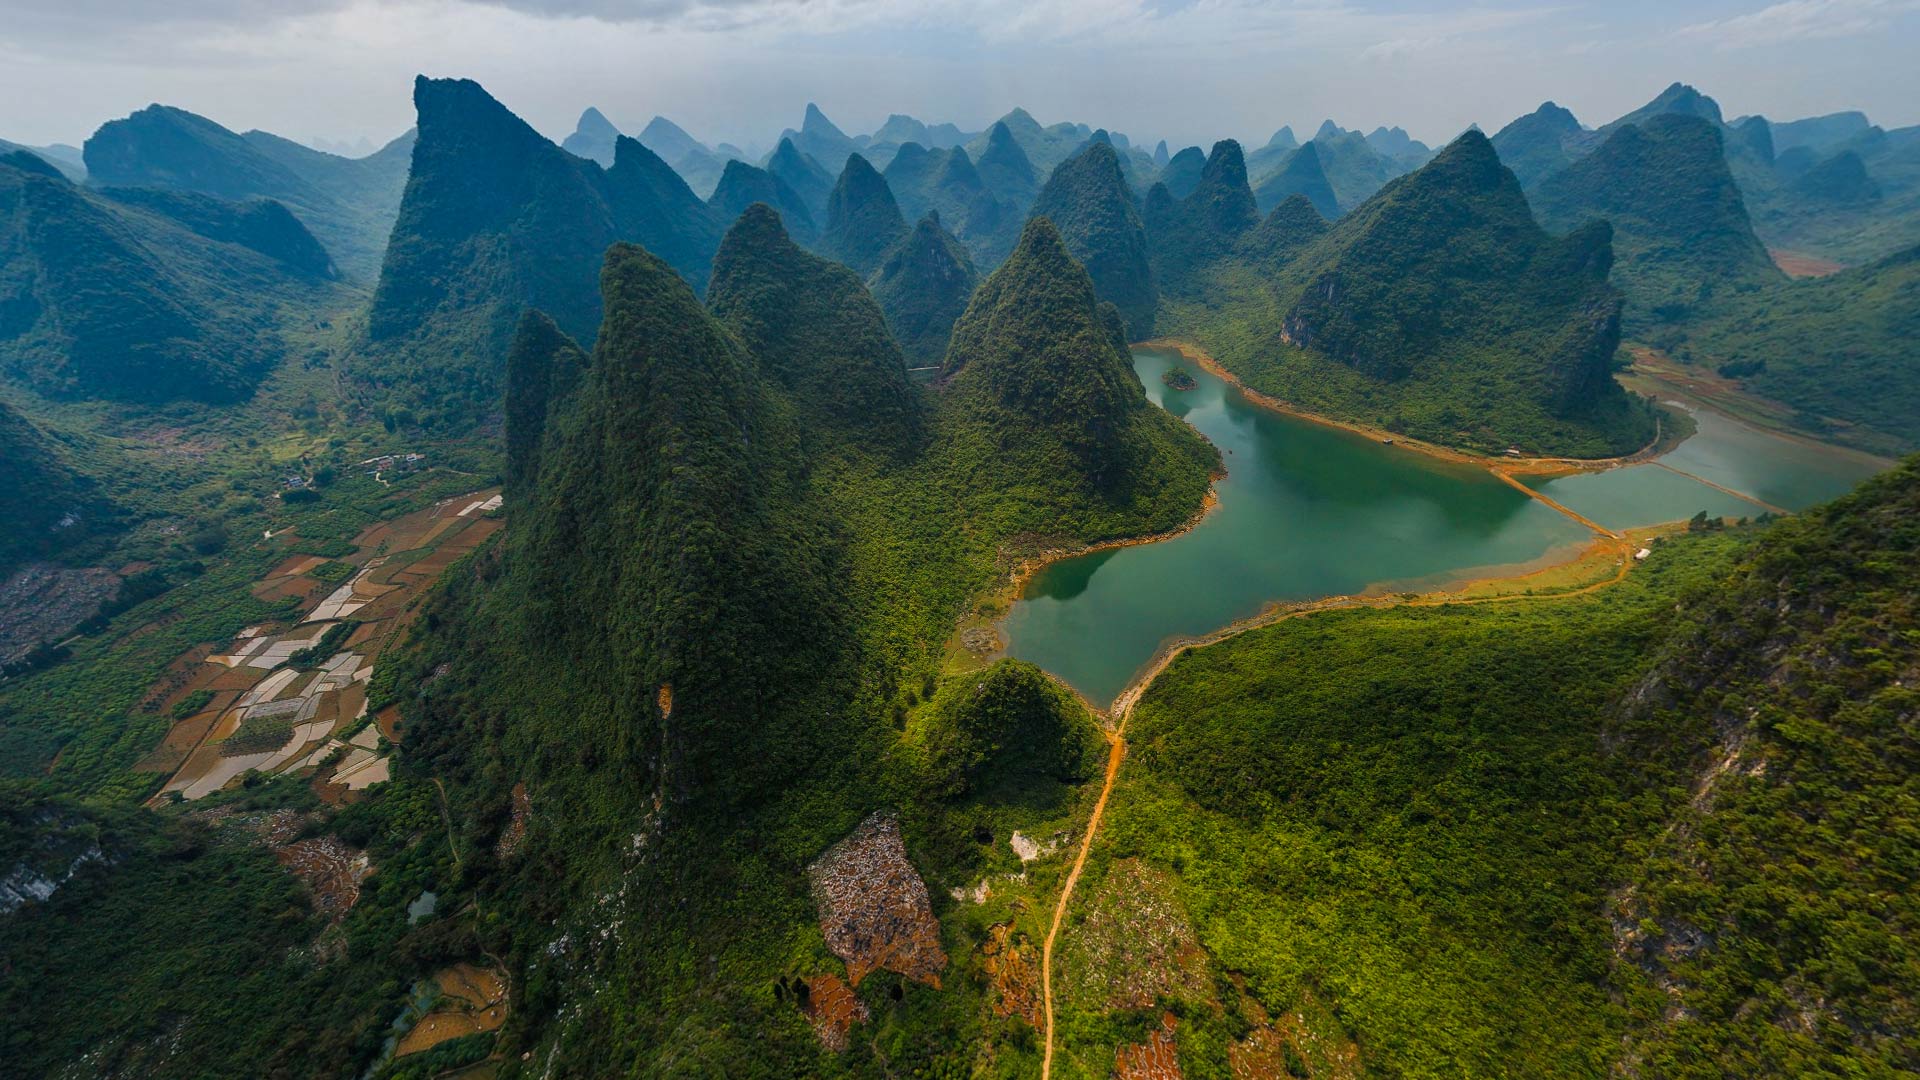 Guilin NP